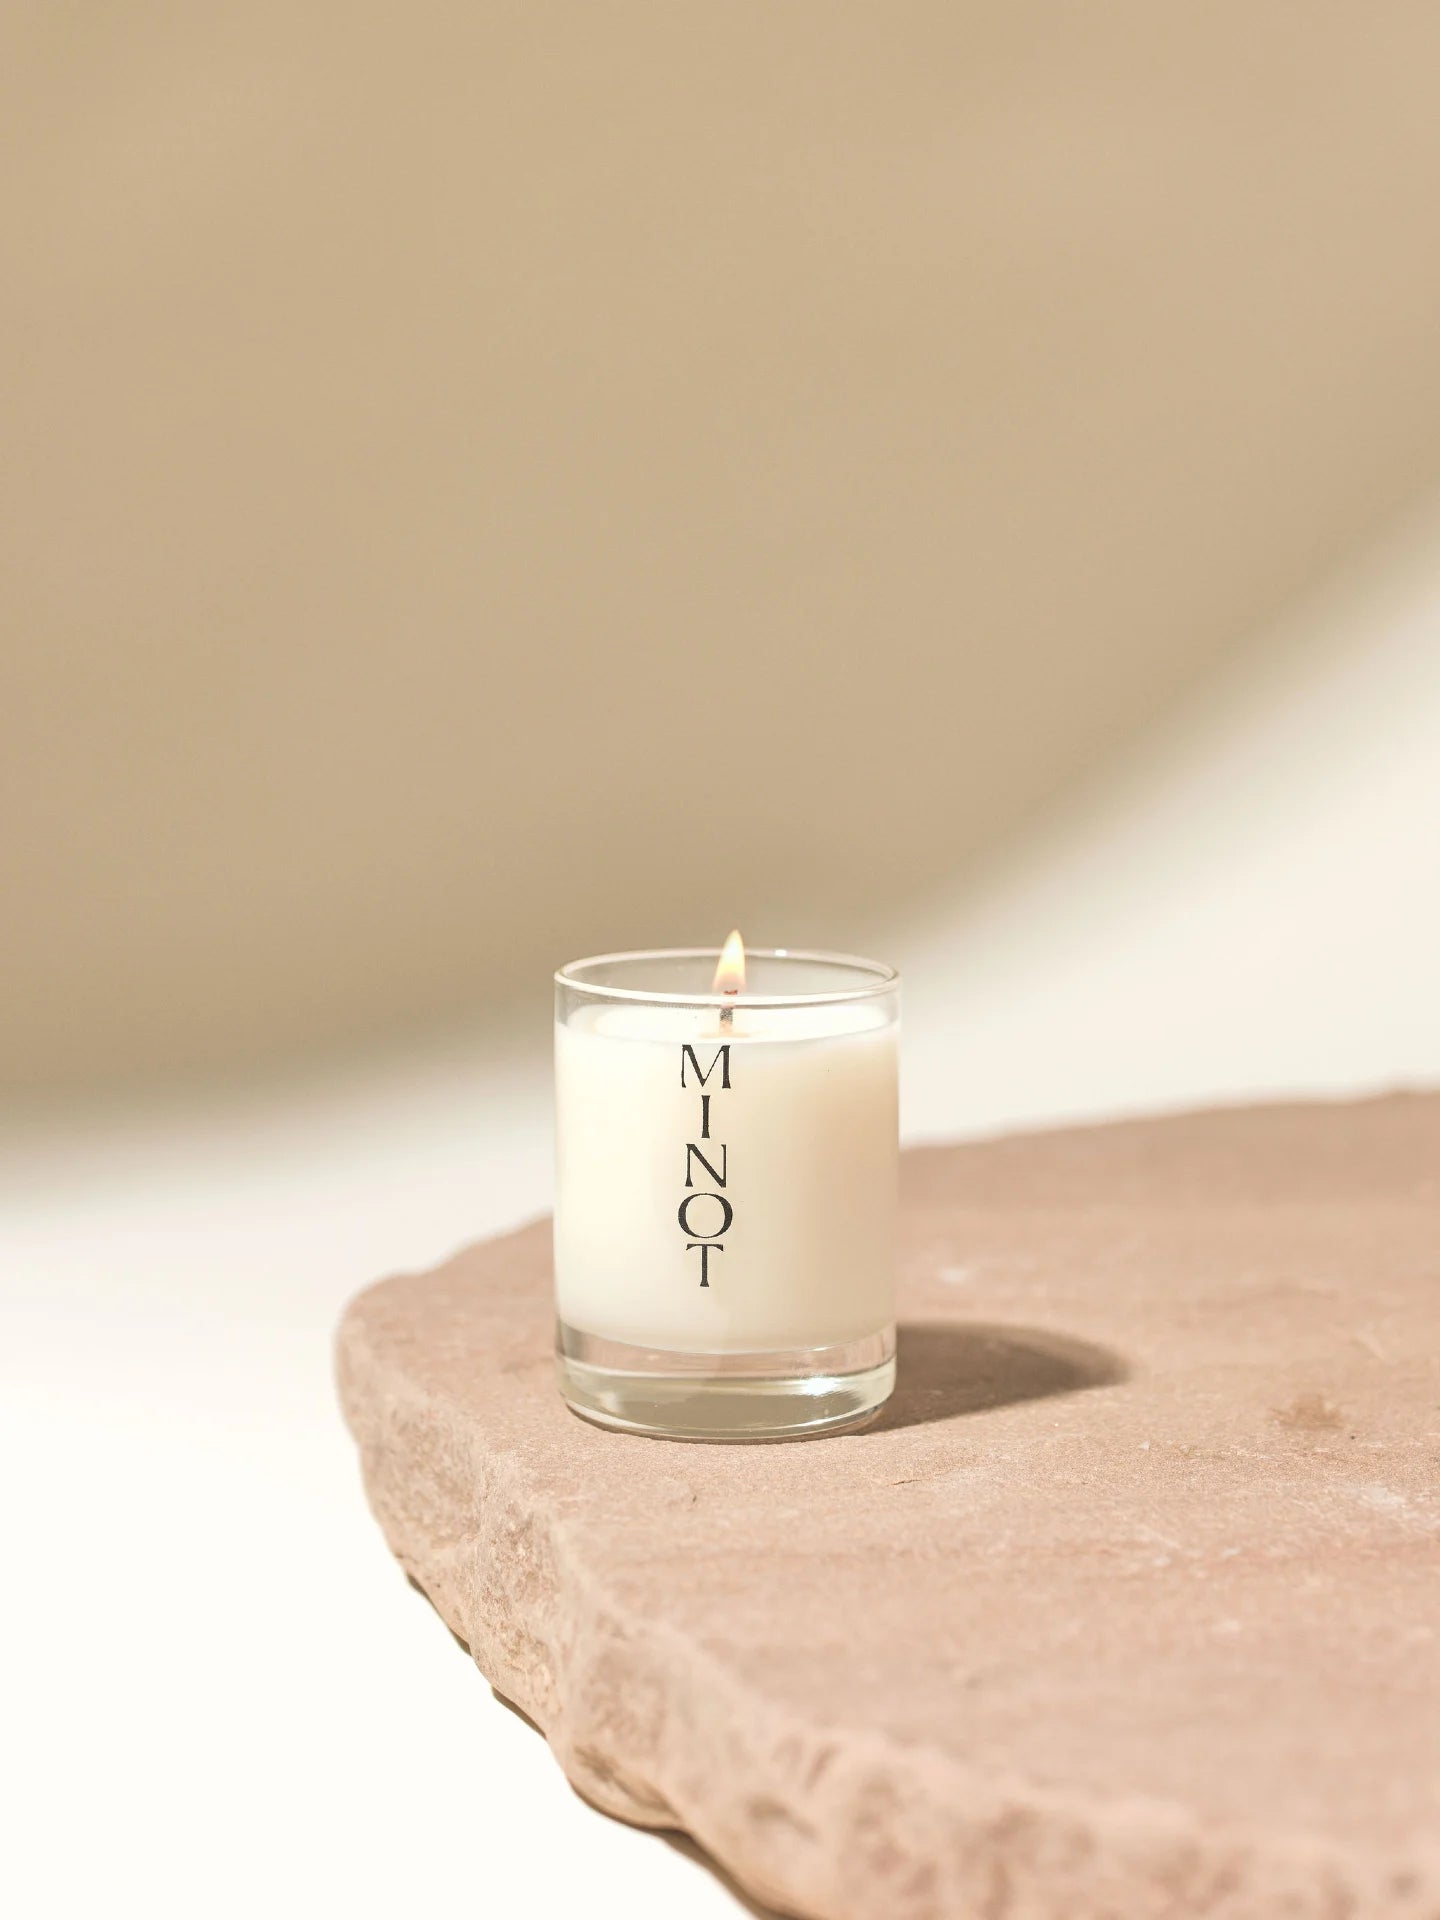 The Cerulean Tide Mini candle's fresh, bright scent comes from its natural, eco-friendly ingredients